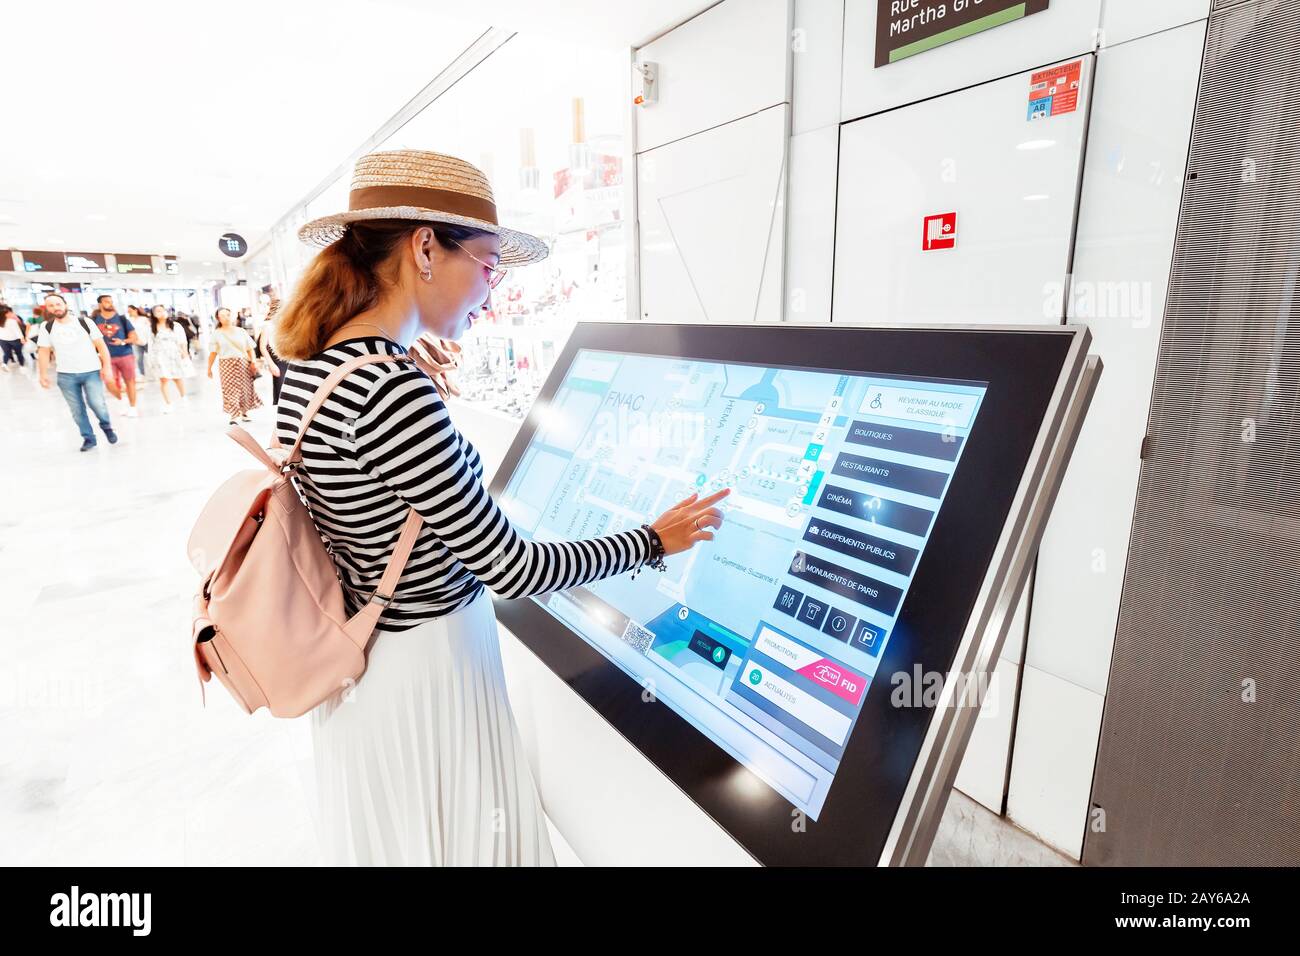 28 July 2019, Paris, France: Asian girl uses touchscreen terminal to find the right boutique in a big shopping Mall Stock Photo